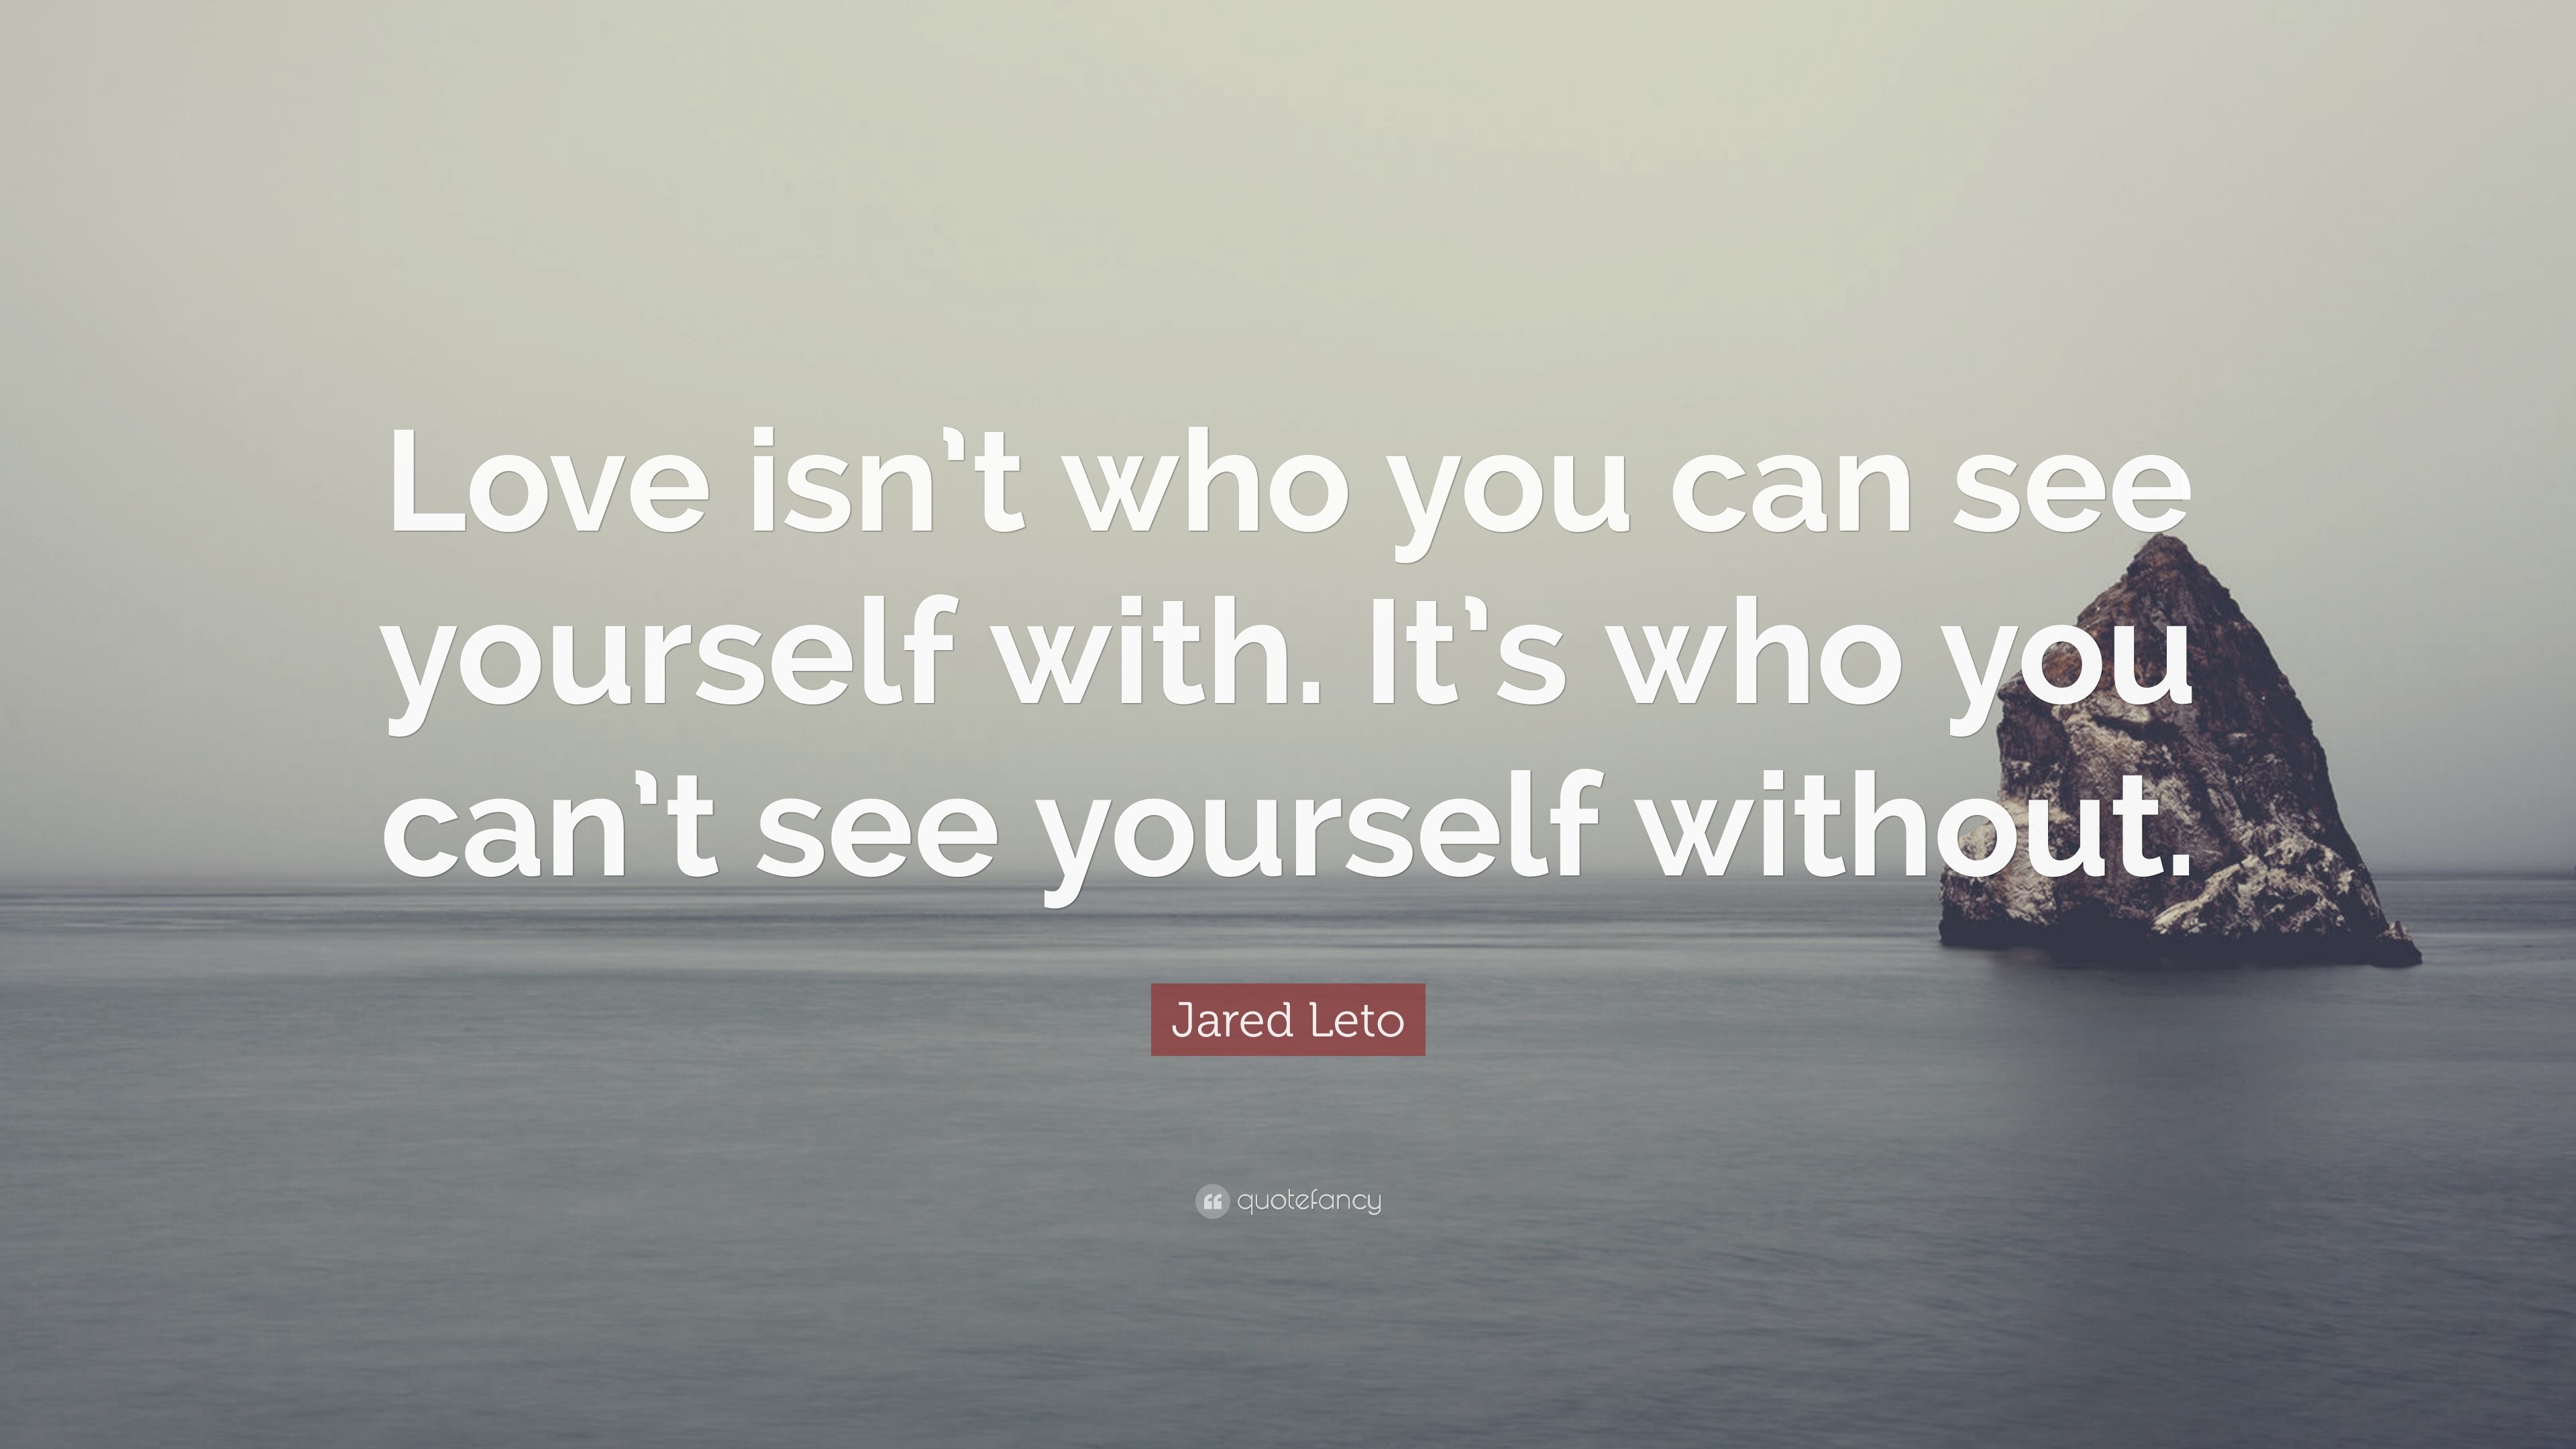 Jared Leto Quote “Love isn t who you can see yourself with